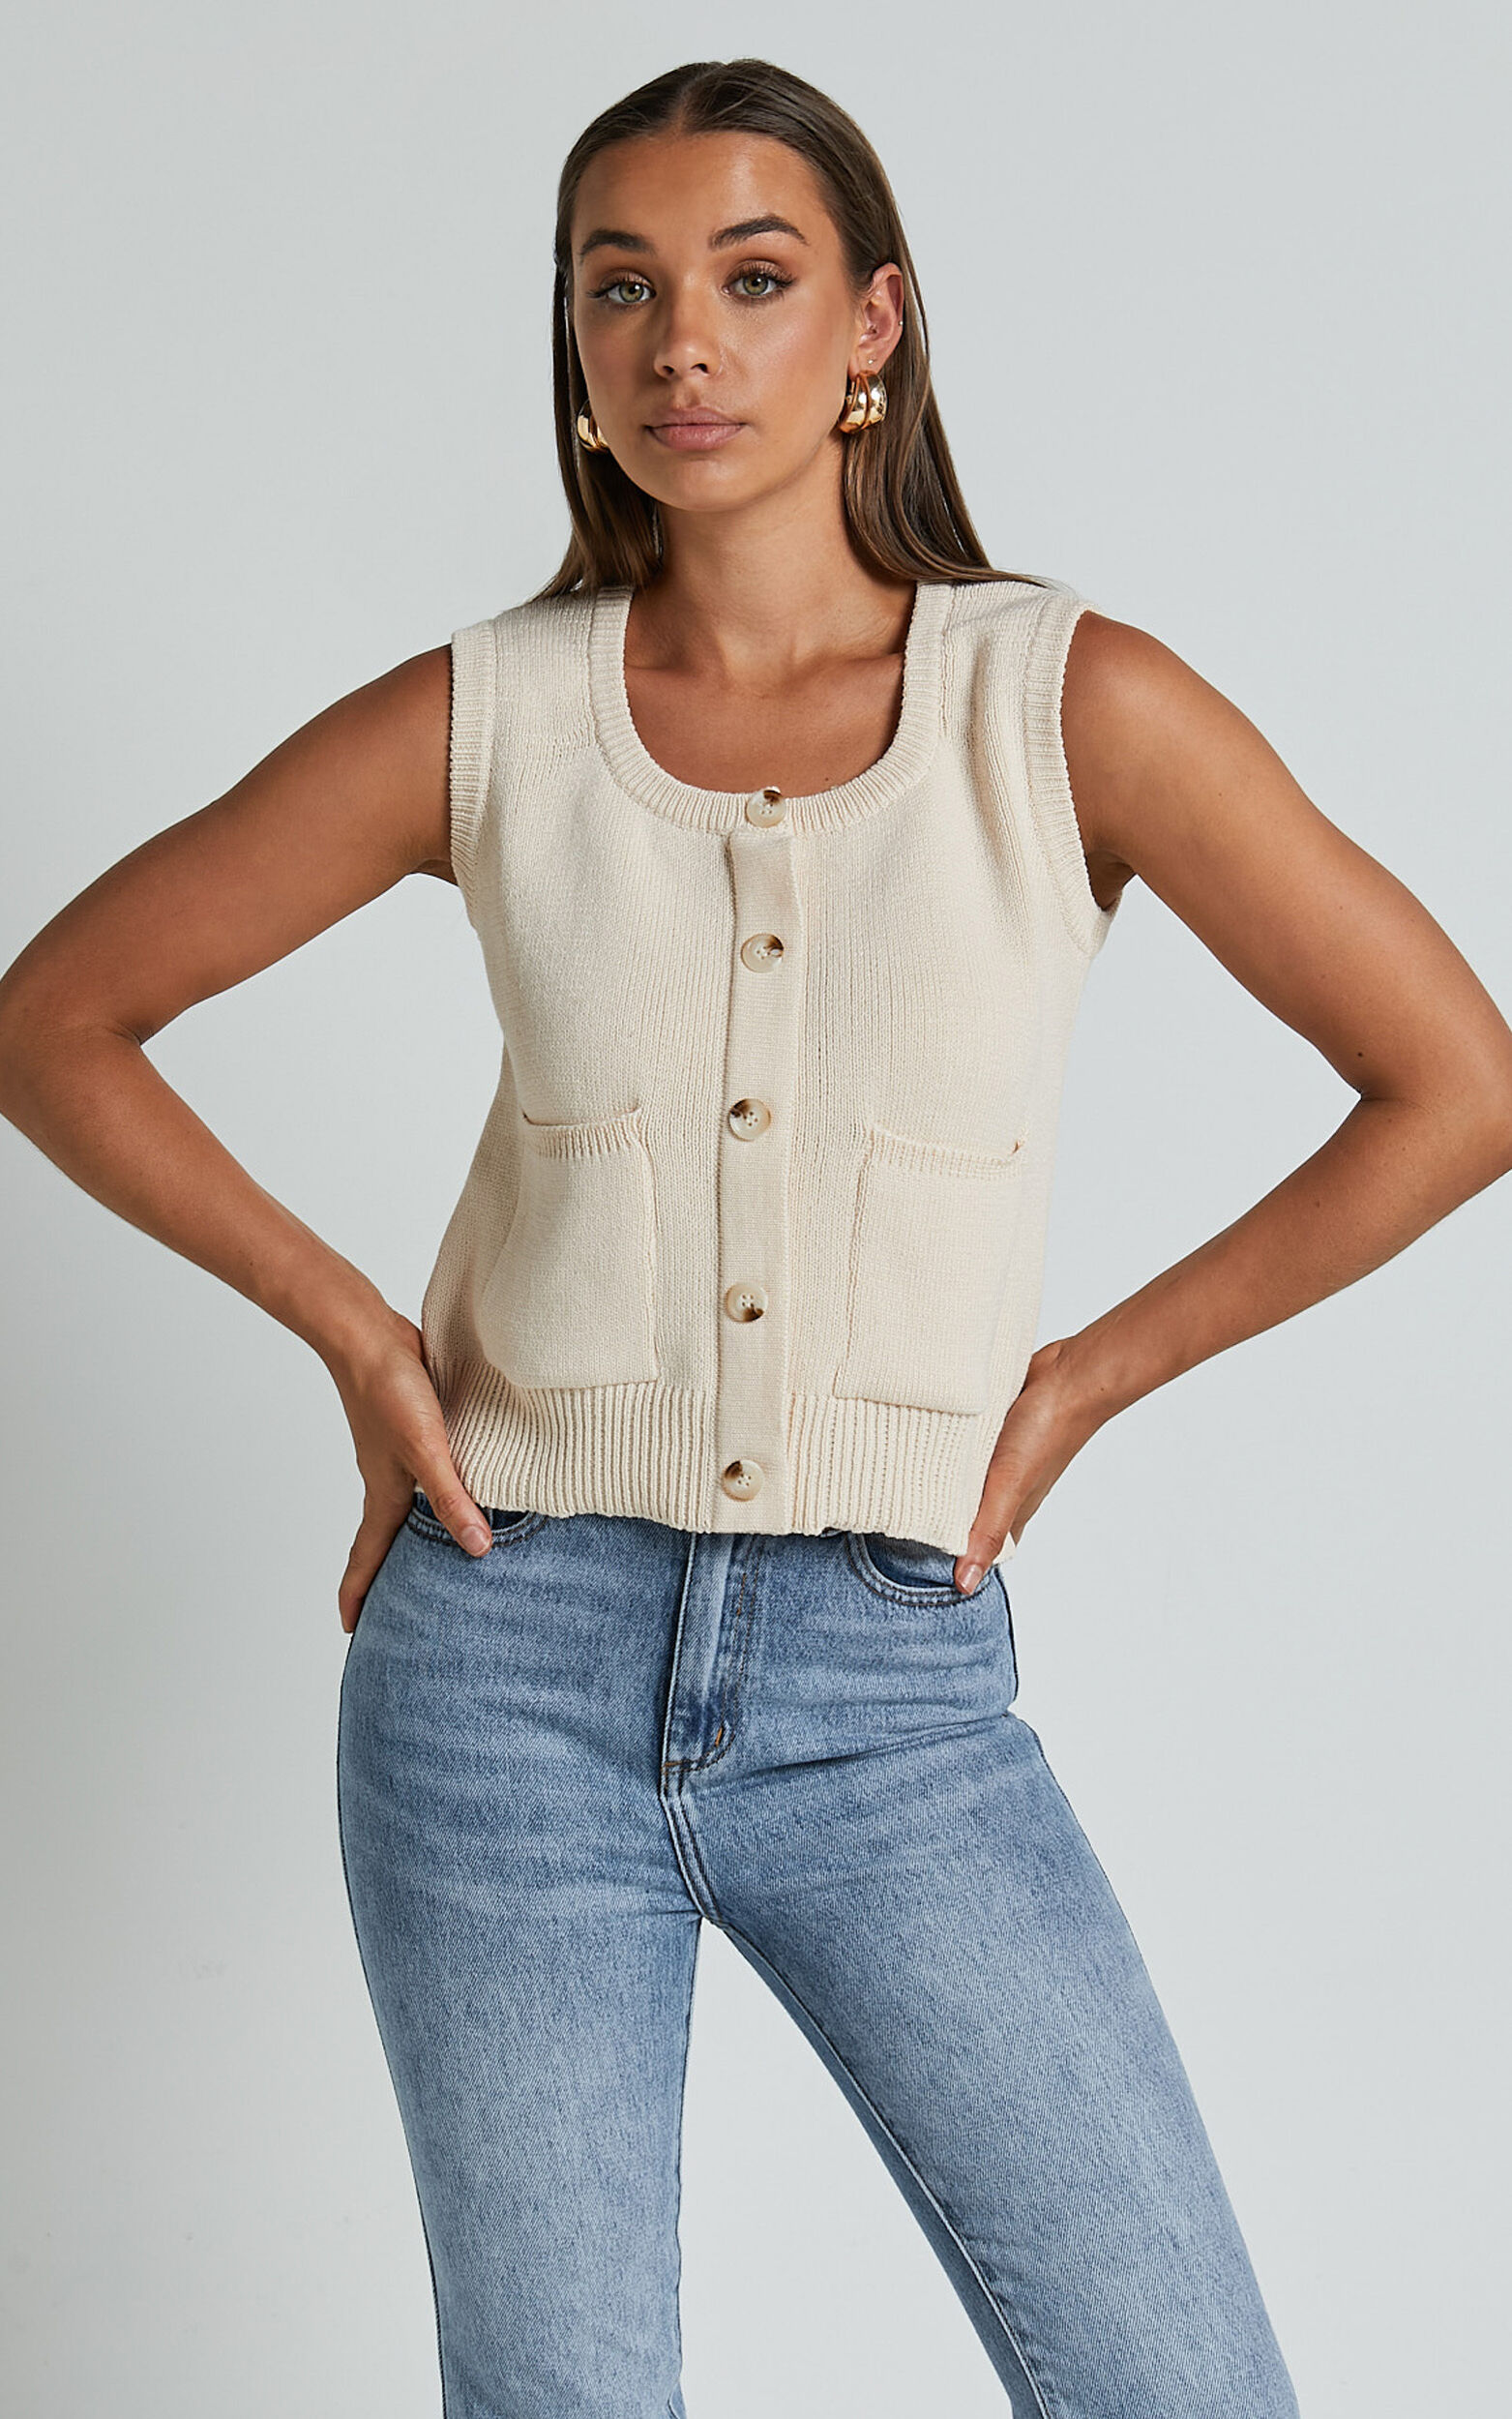 Ricky Vest - Knitted Button Through Vest in Cream - L, CRE1